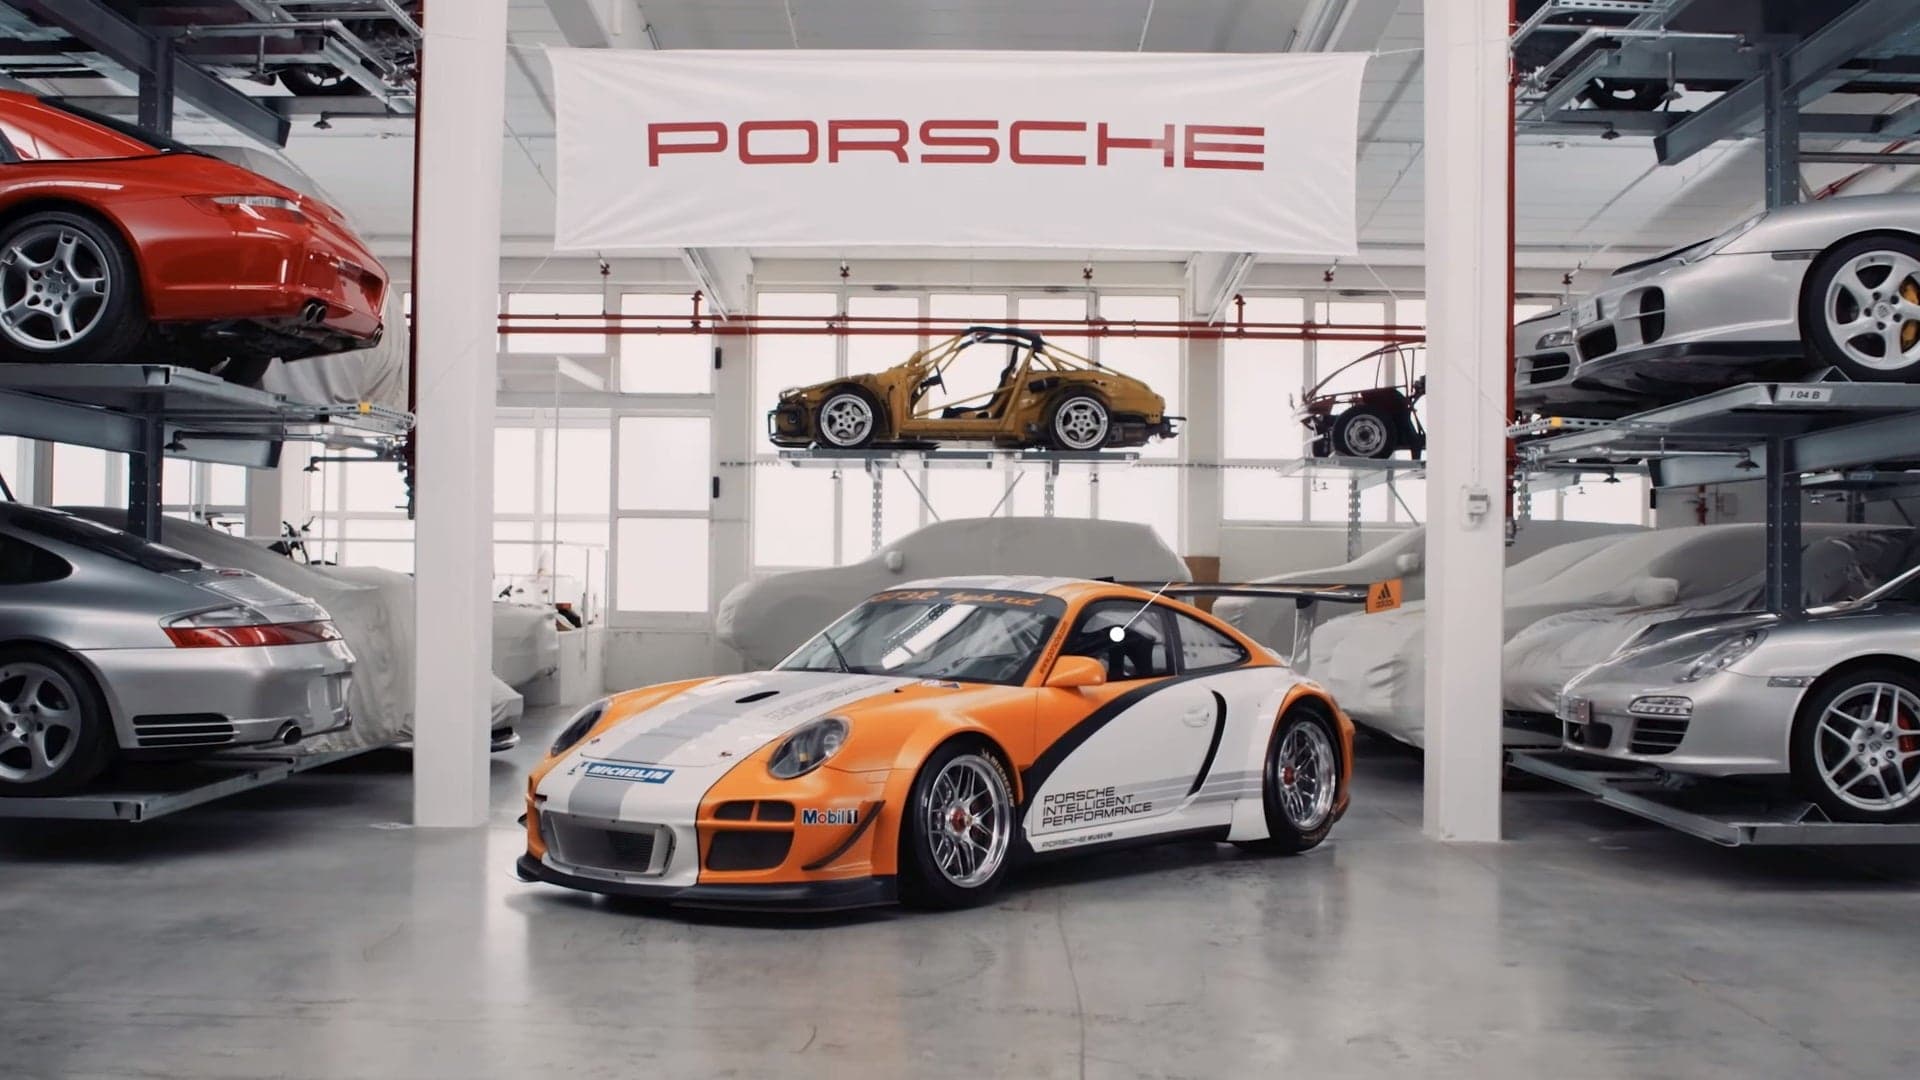 Porsche’s Fourth Issue Of 9:11 Magazine Impresses With Its Beauty